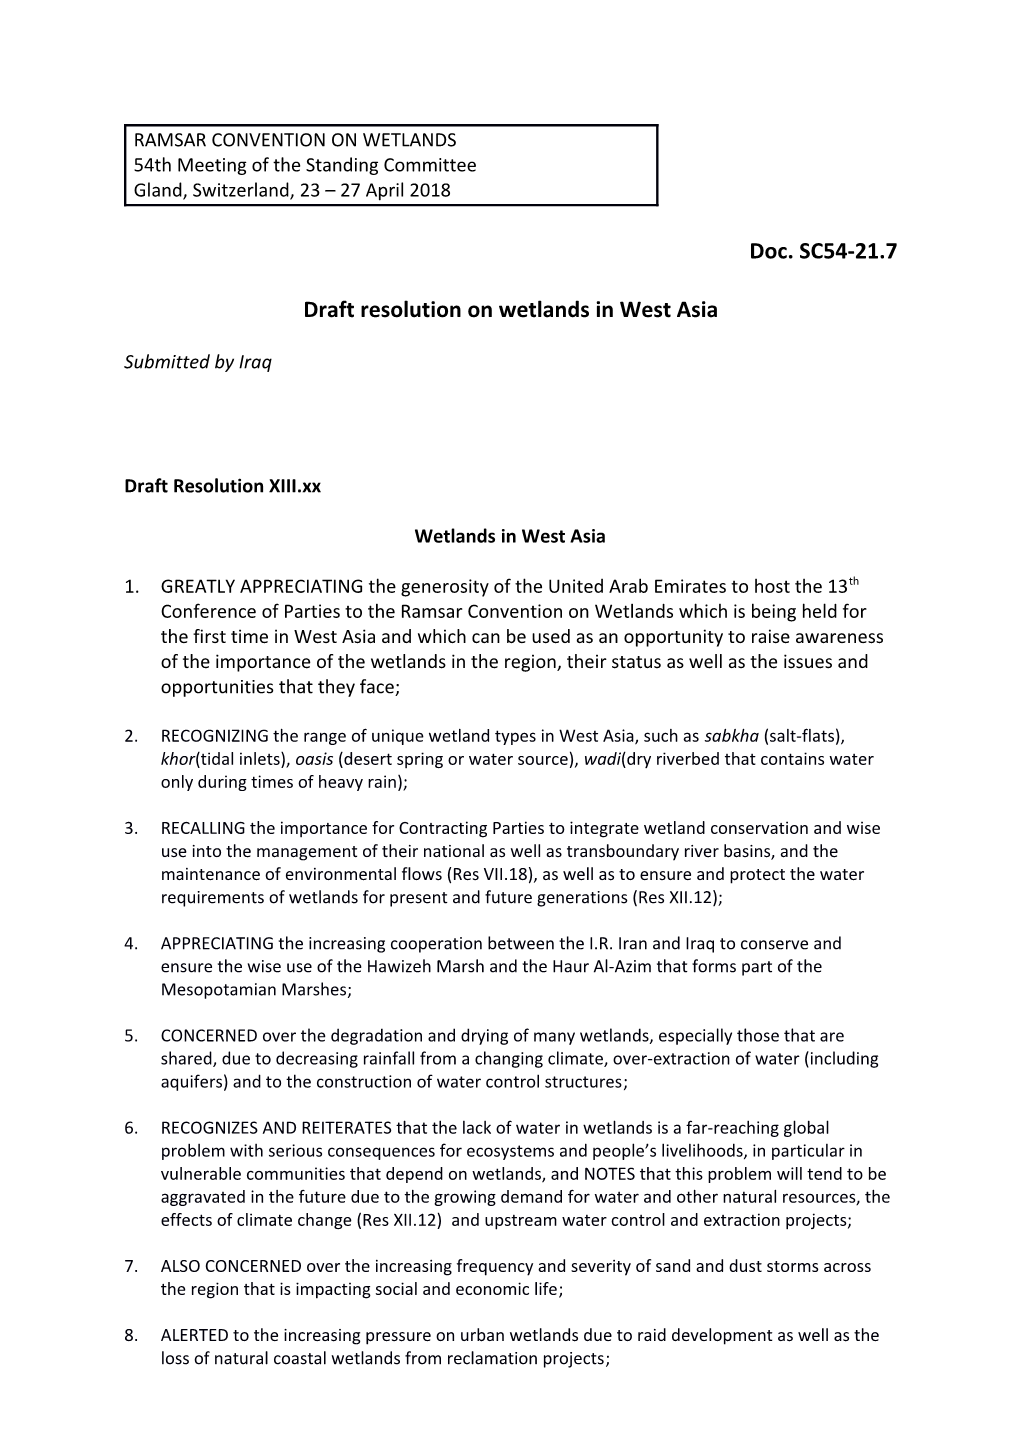 Draft Resolution on Wetlands in West Asia